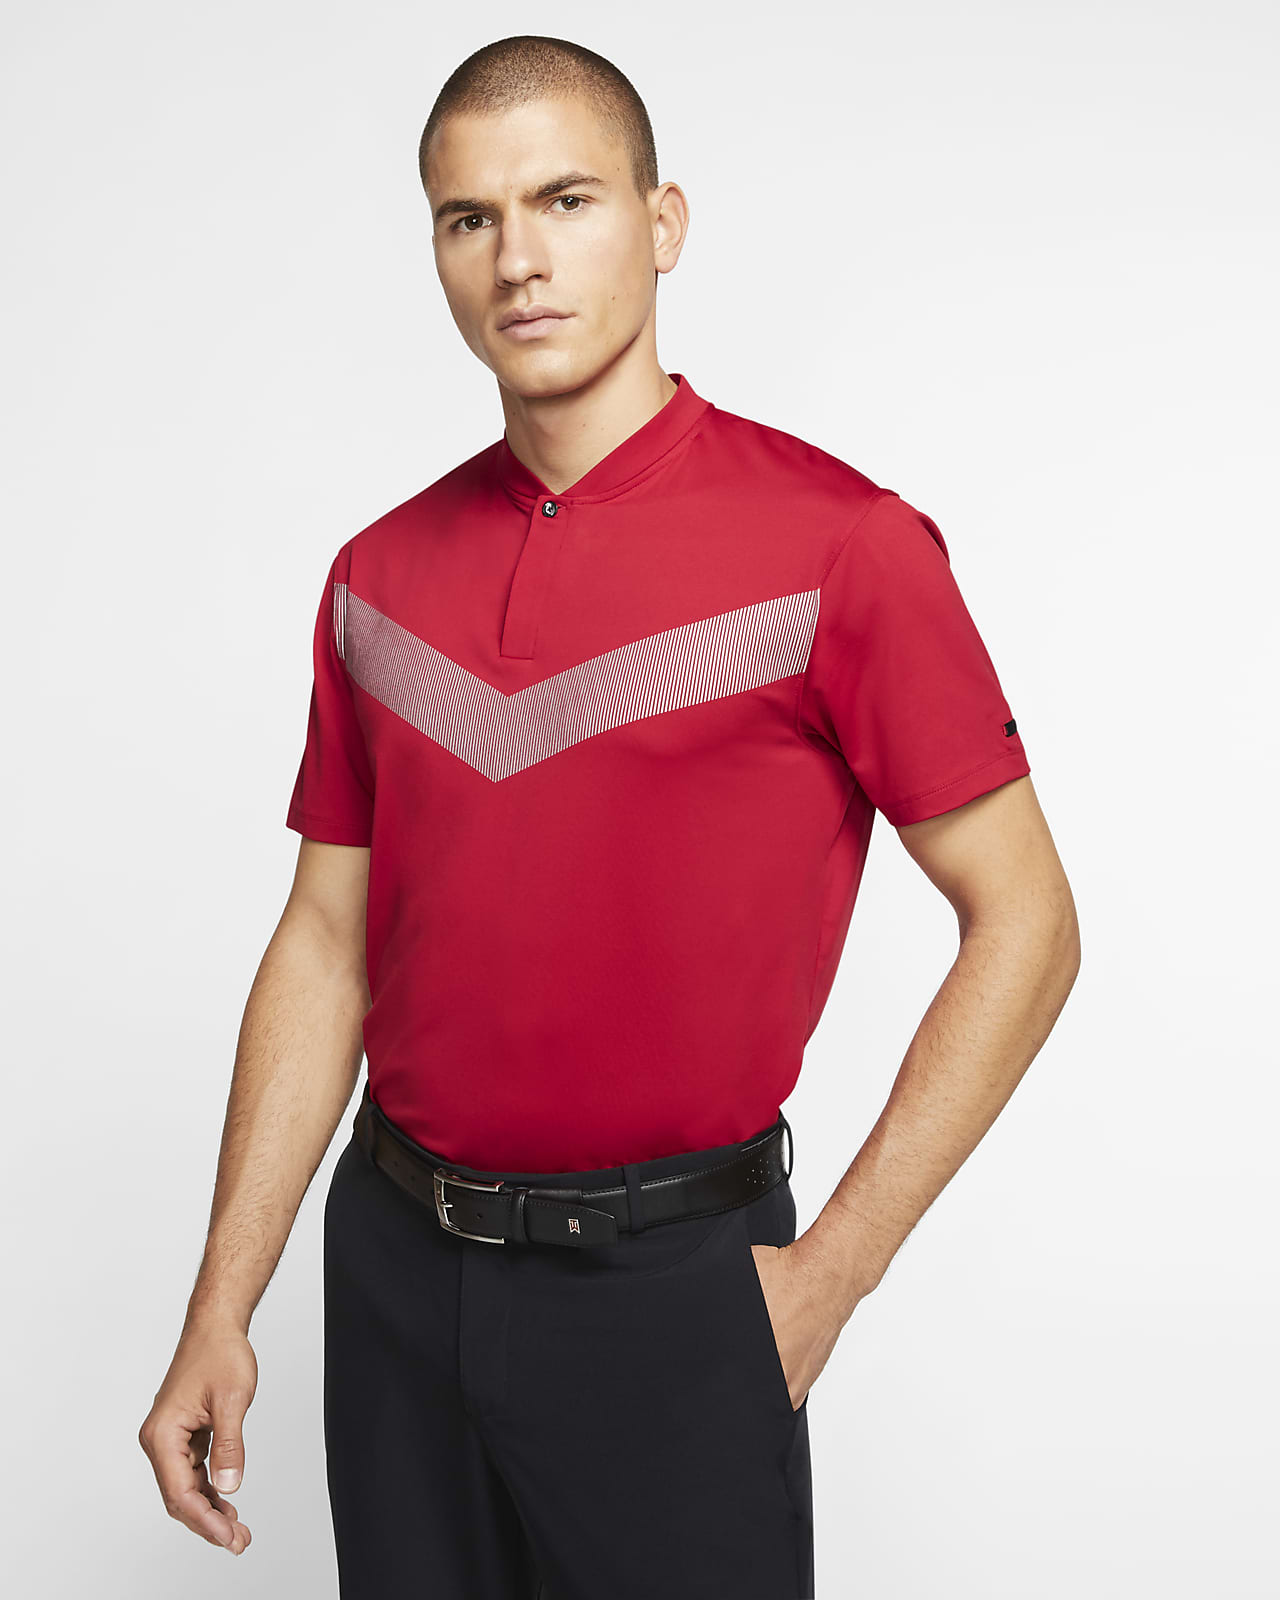 tiger woods nike polo